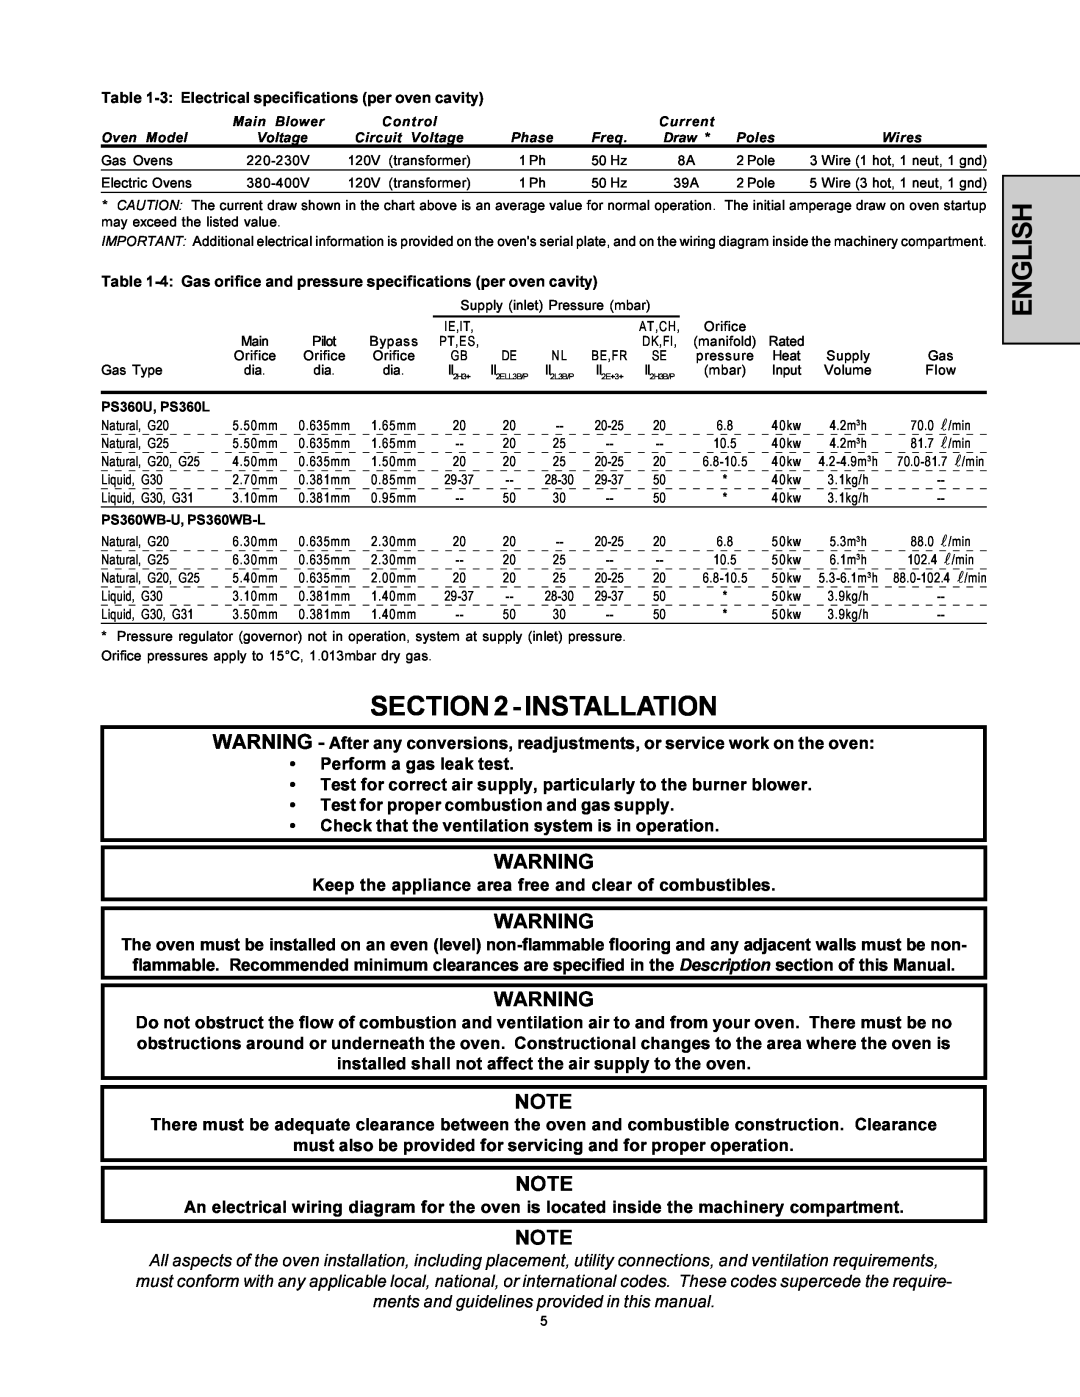 Middleby Marshall PS360-L, PS360WB-U installation manual Installation, English, Perform a gas leak test 